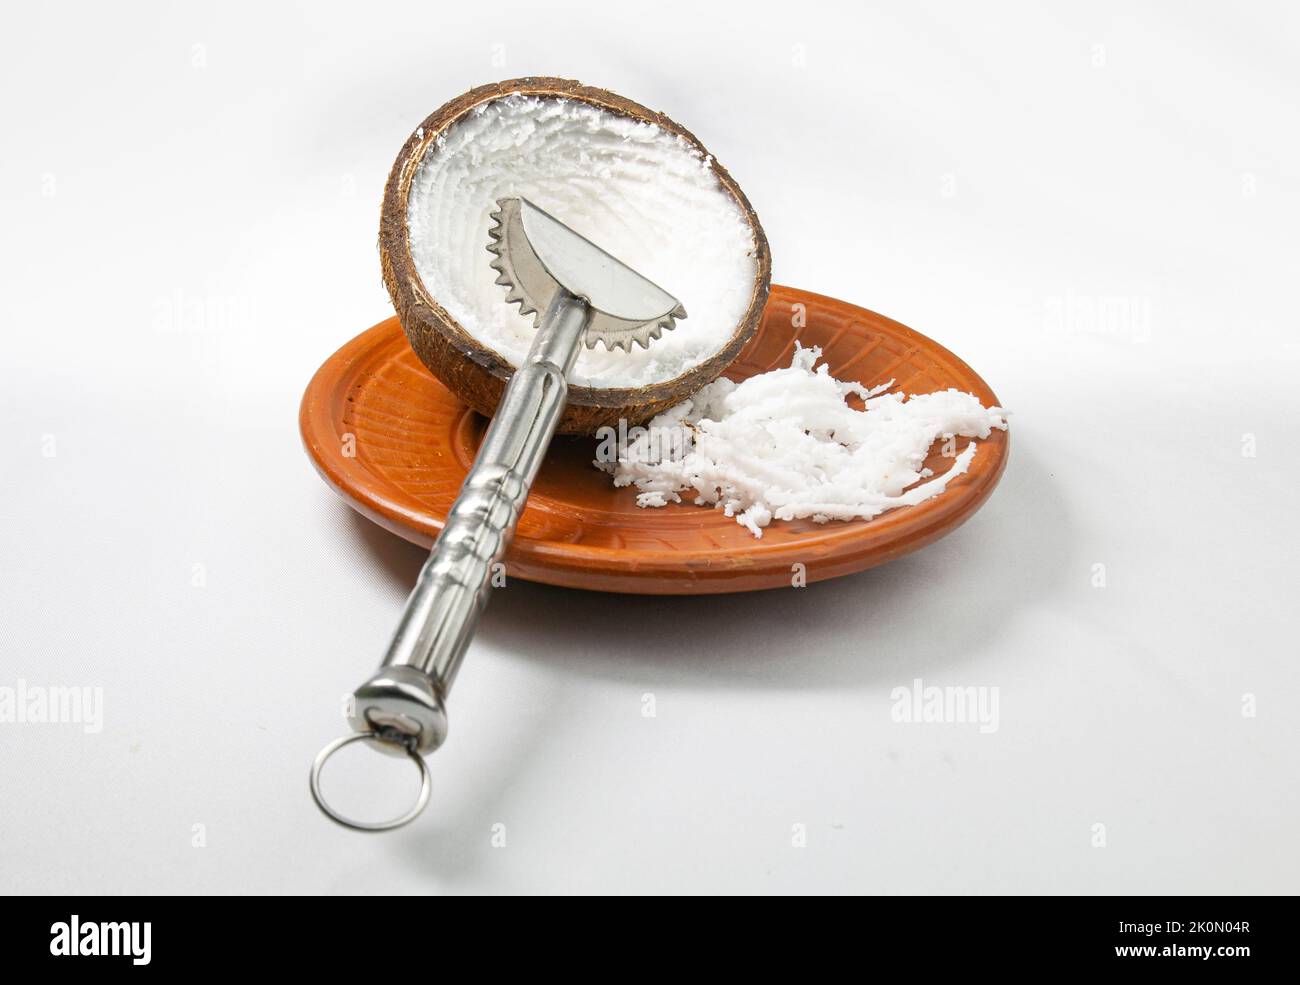 https://c8.alamy.com/comp/2K0N04R/grated-coconut-in-a-mud-plate-with-a-coconut-hand-grater-on-white-background-2K0N04R.jpg